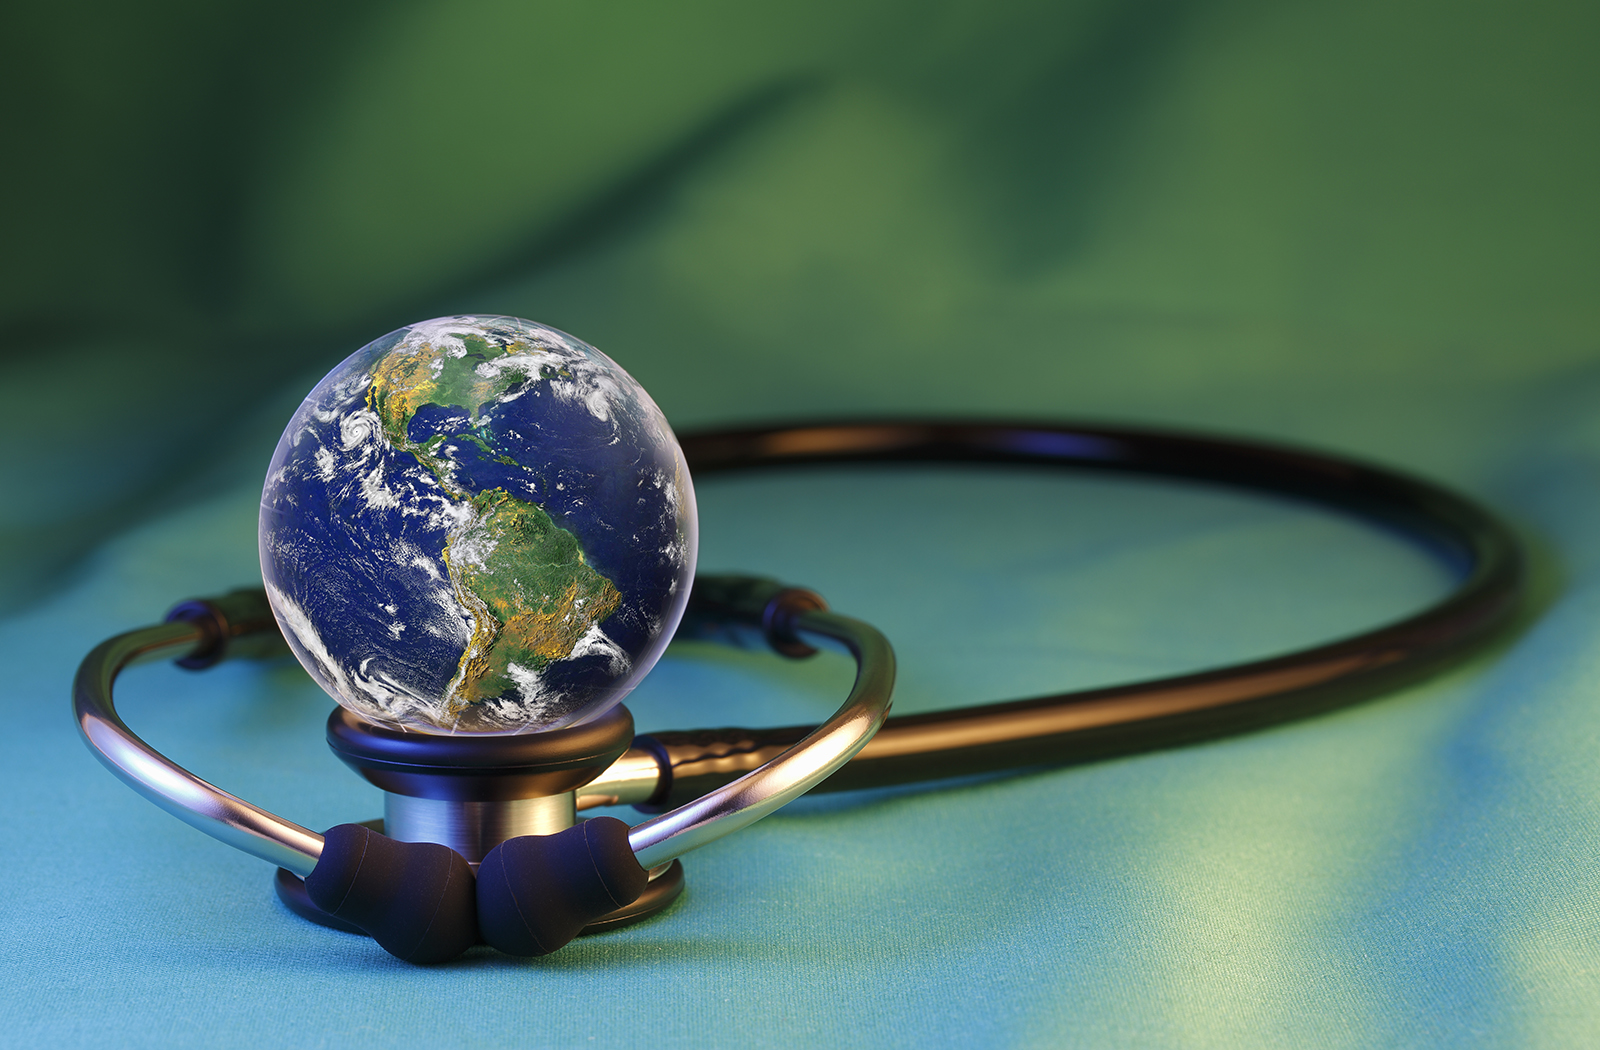 A stethoscope with a small globe sitting atop it